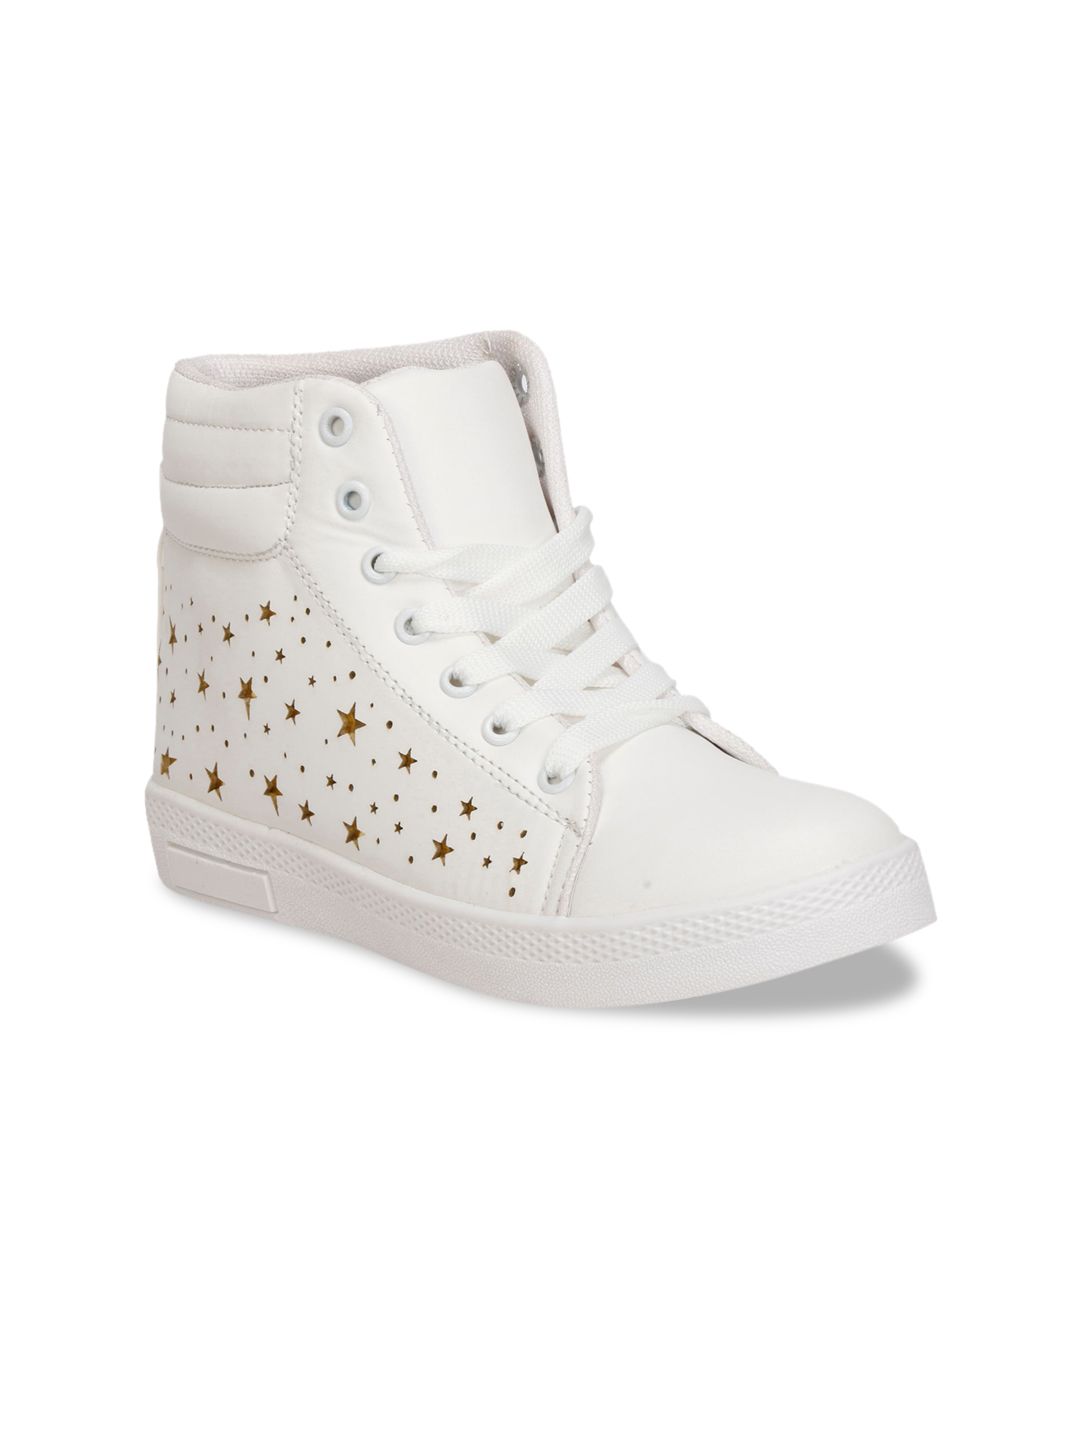 Denill Women White Perforated High-Top Sneakers Price in India